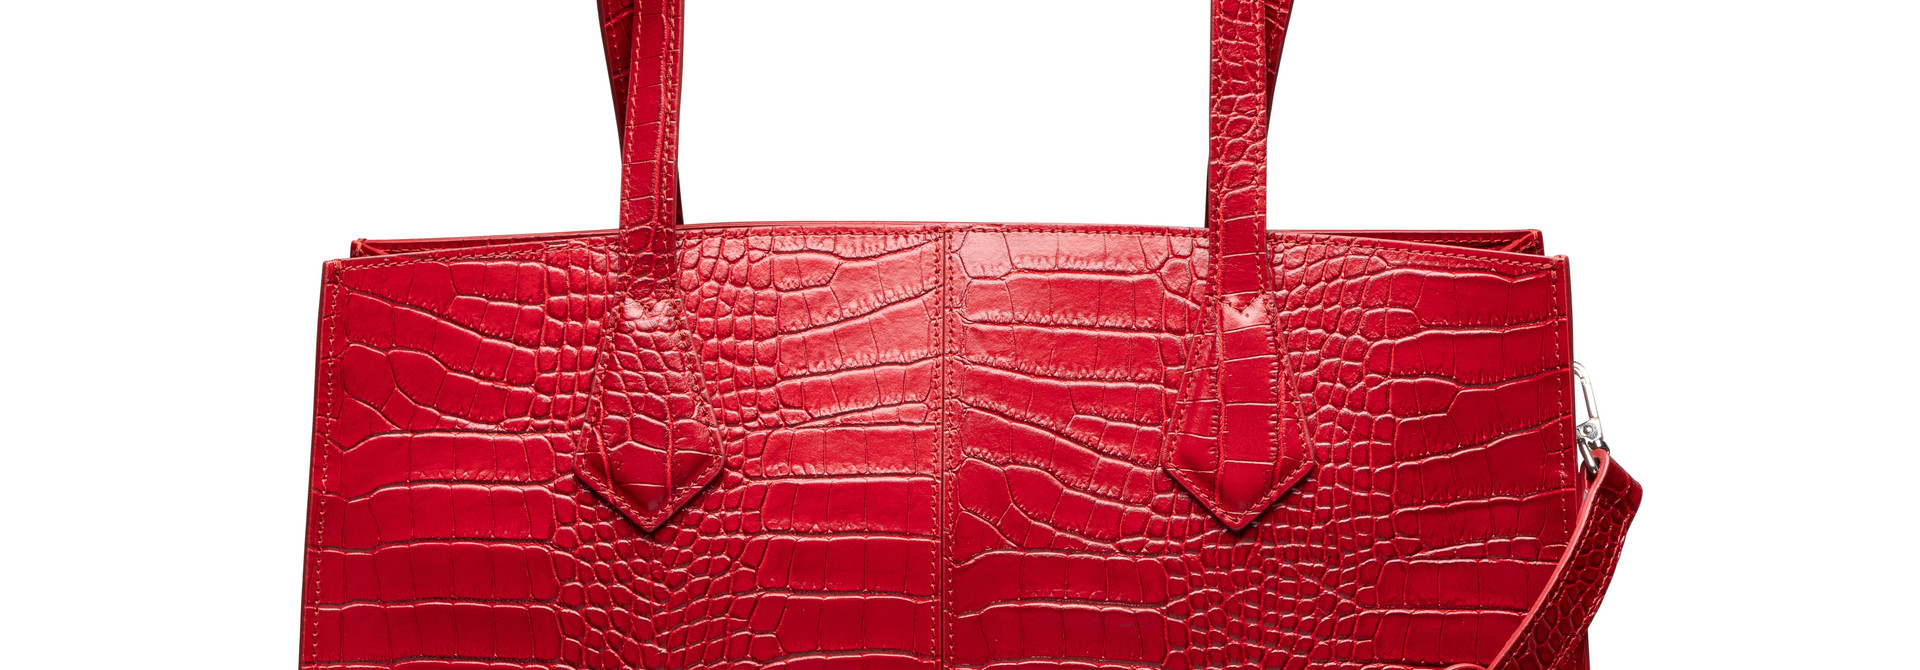 Amsterdam Work Tote 14 inch Croco Print Red